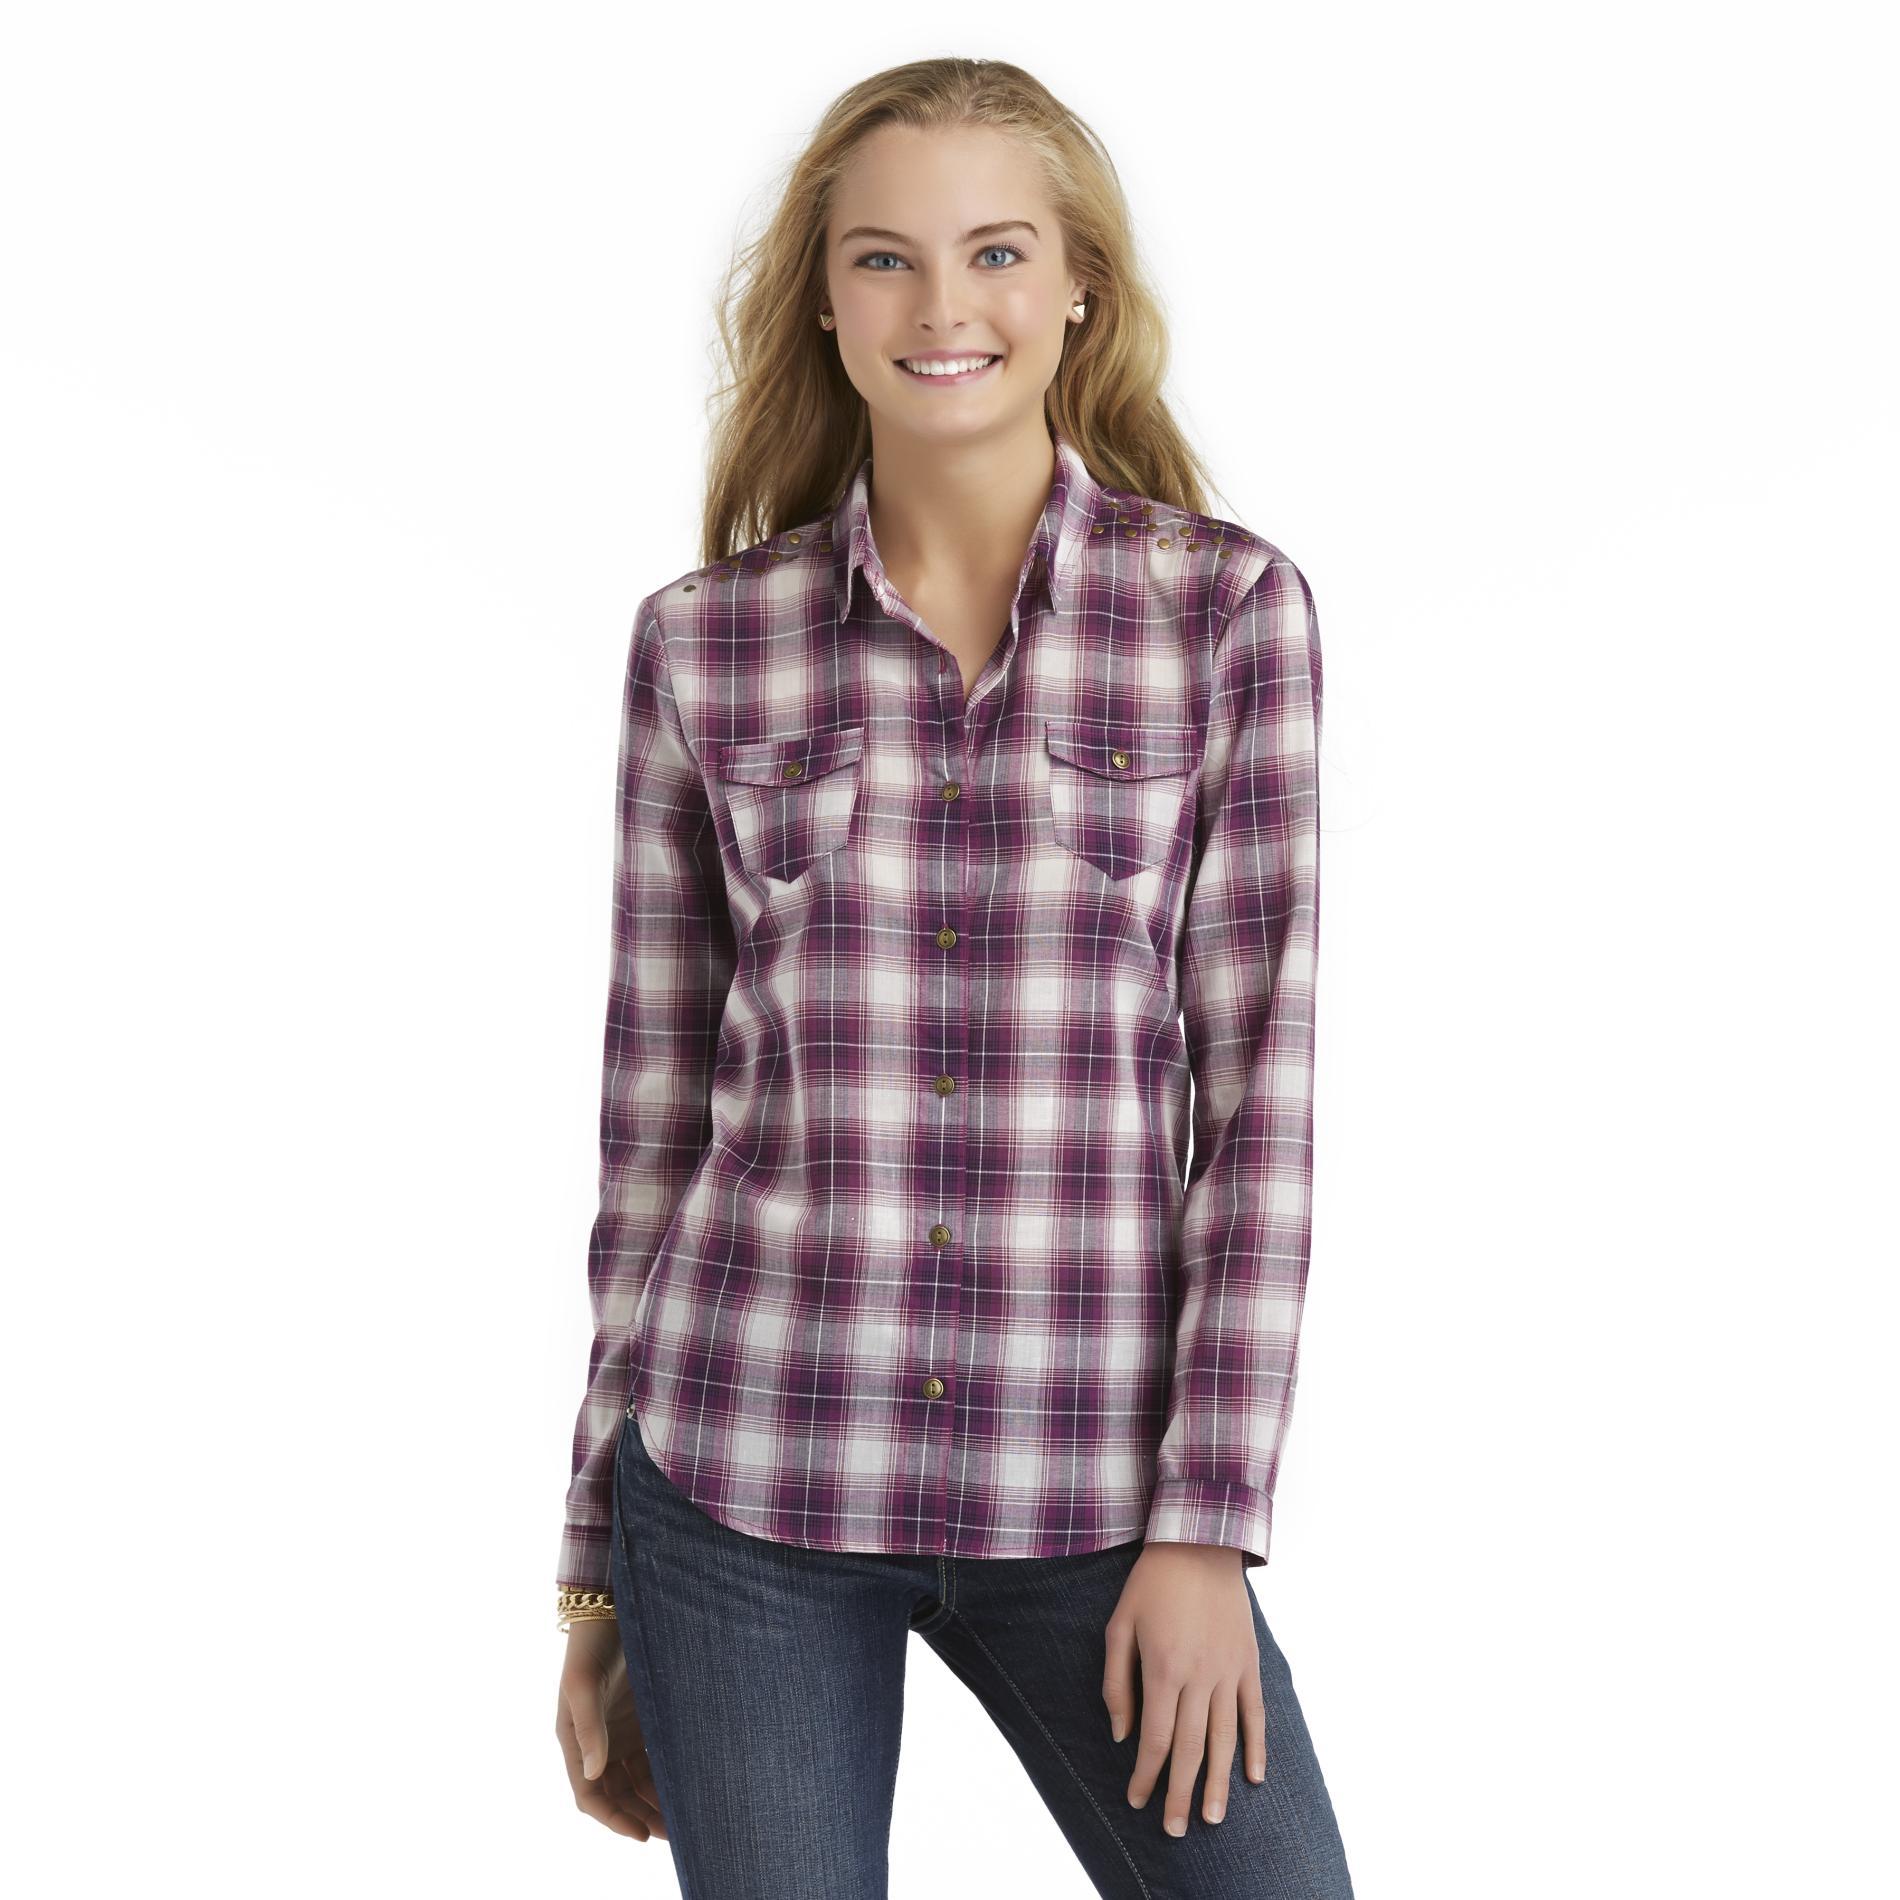 Dream Out Loud by Selena Gomez Junior's Studded Shirt - Plaid ...